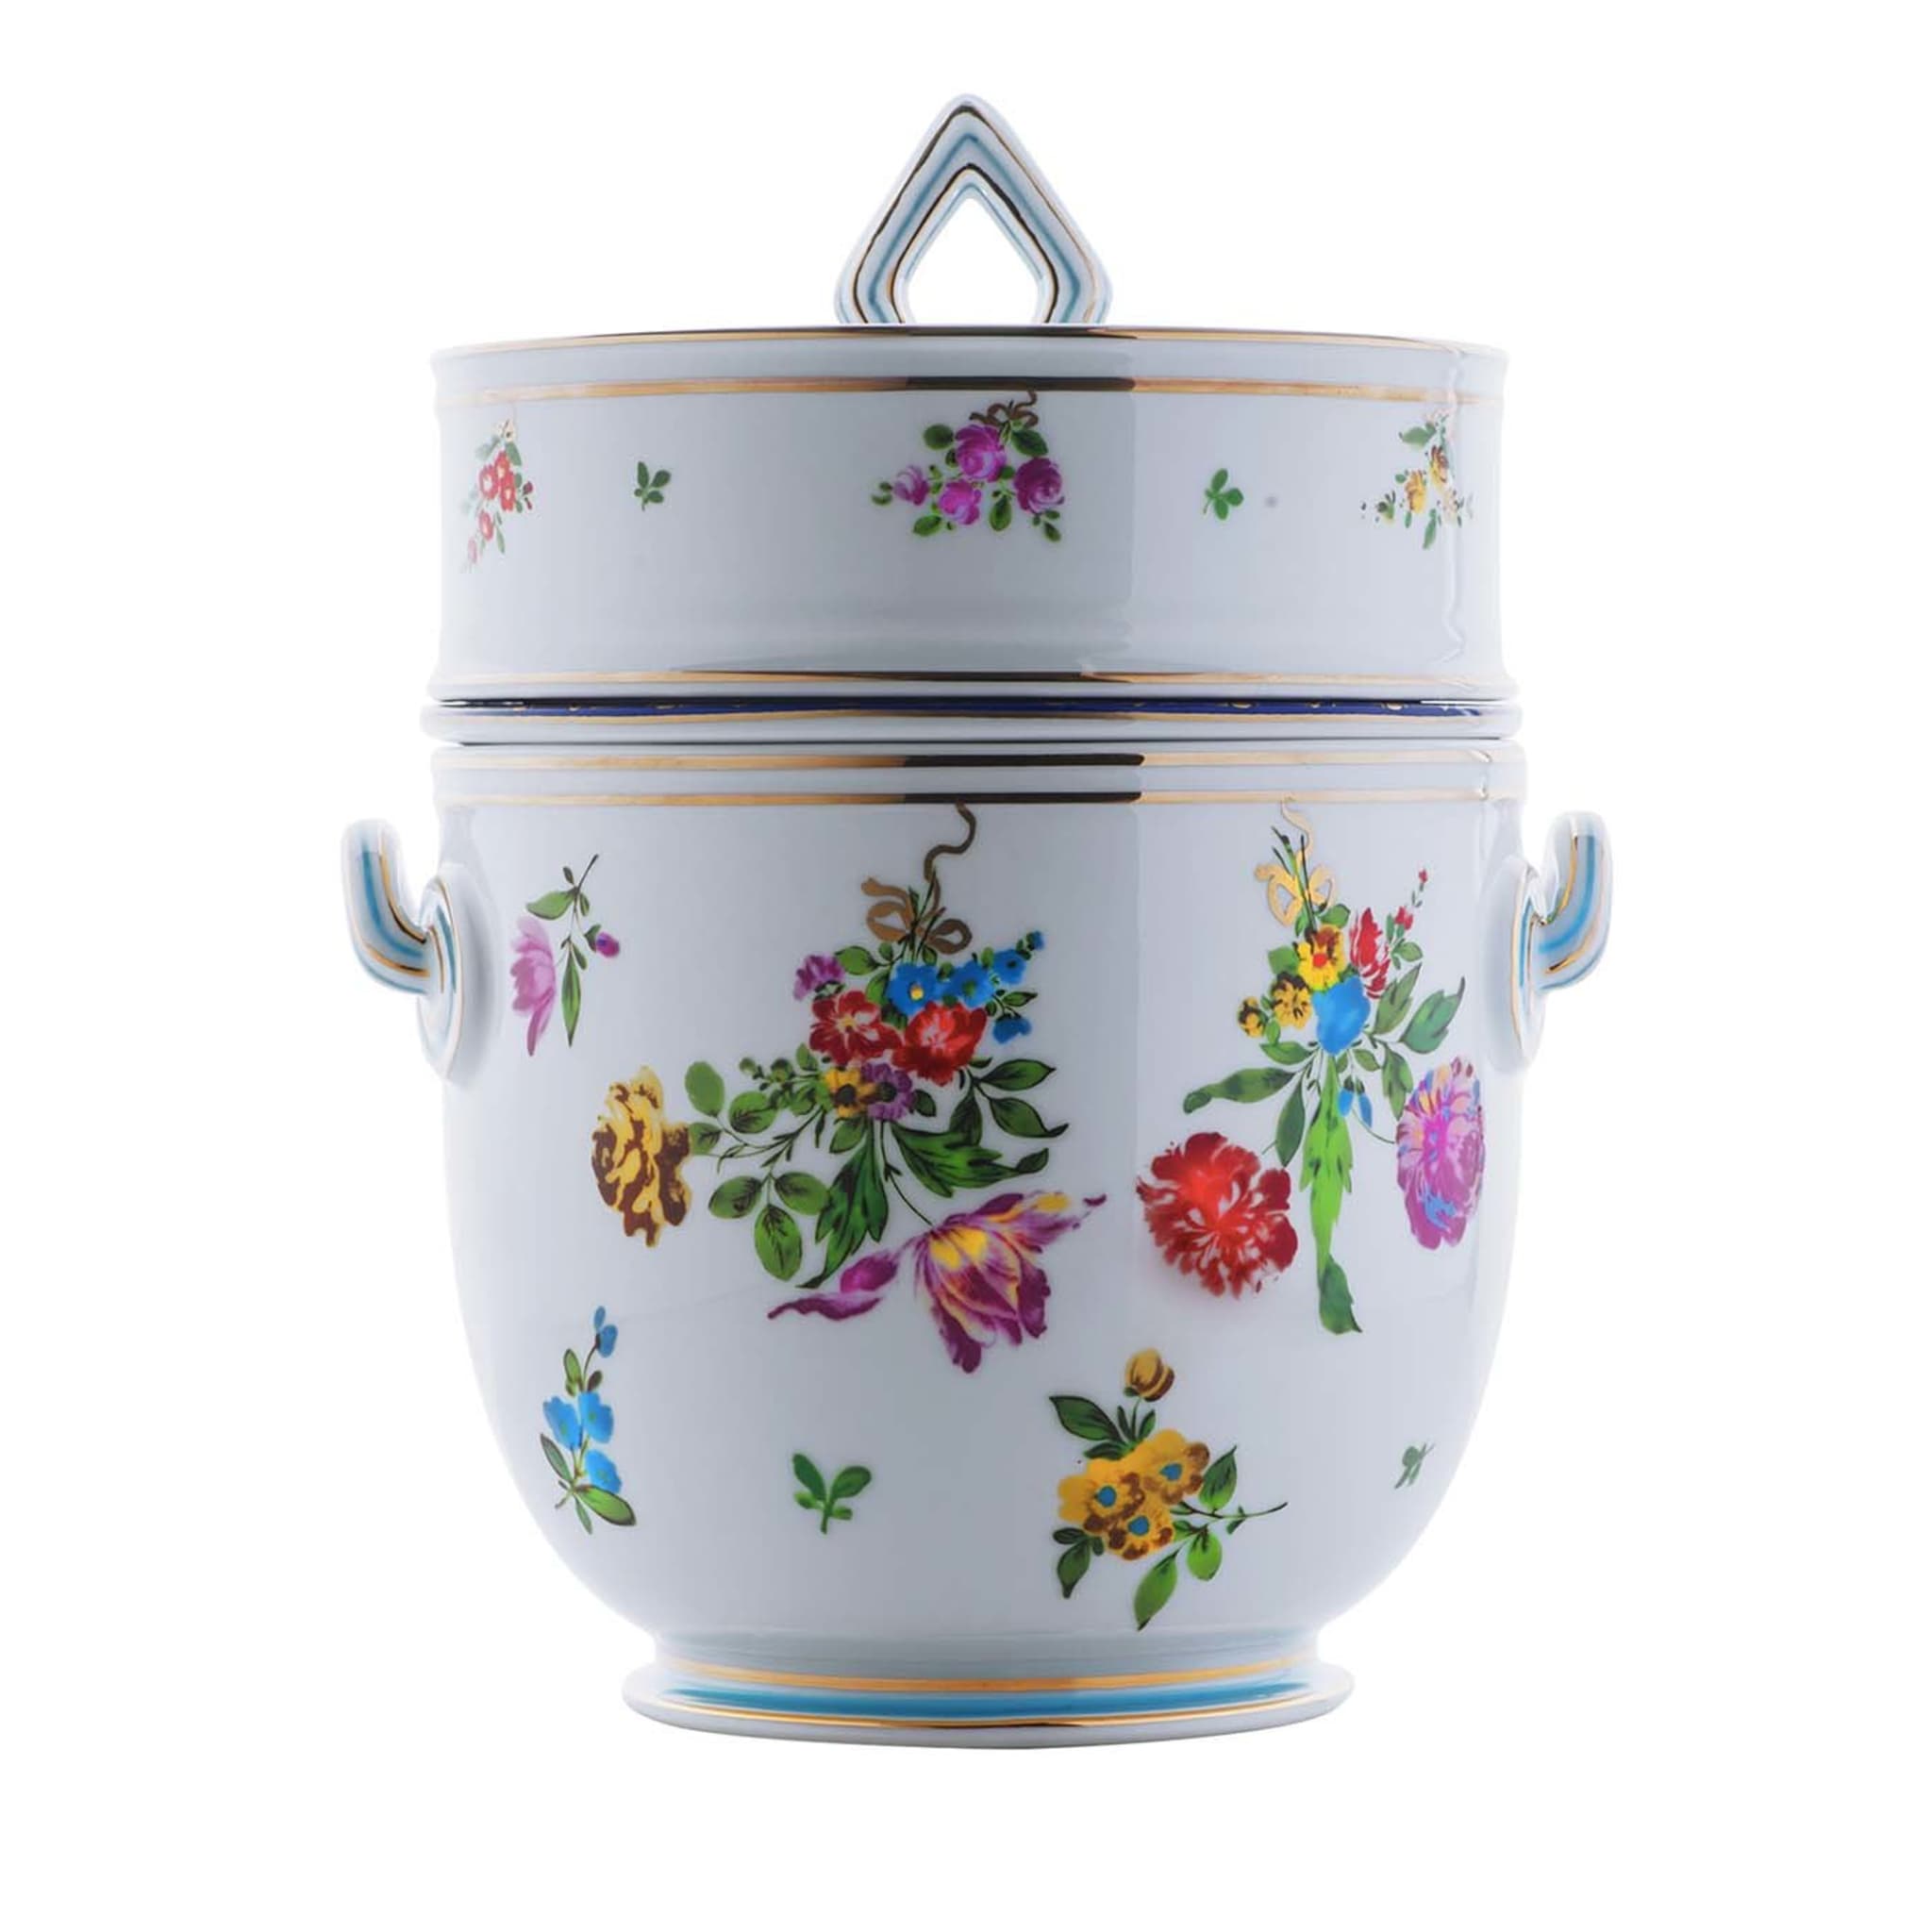 Medium Floral Cooler/Ice Bucket with Lid - Main view